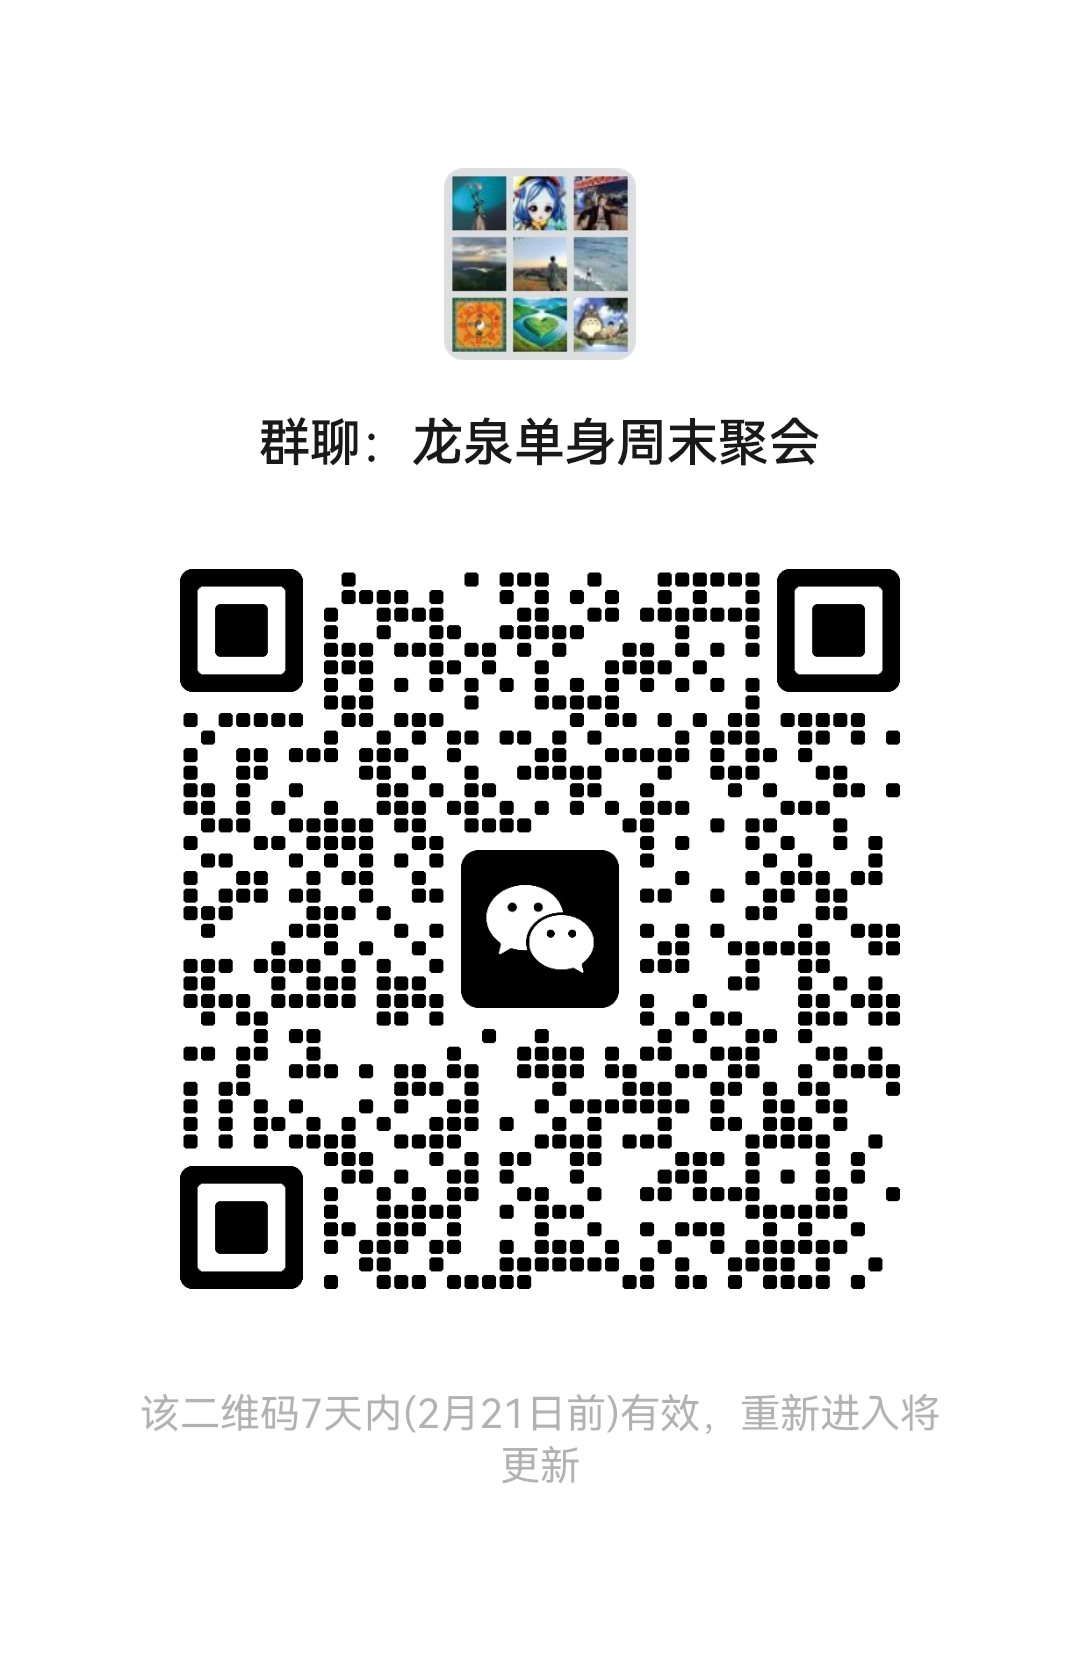 mmqrcode1707911198709.png